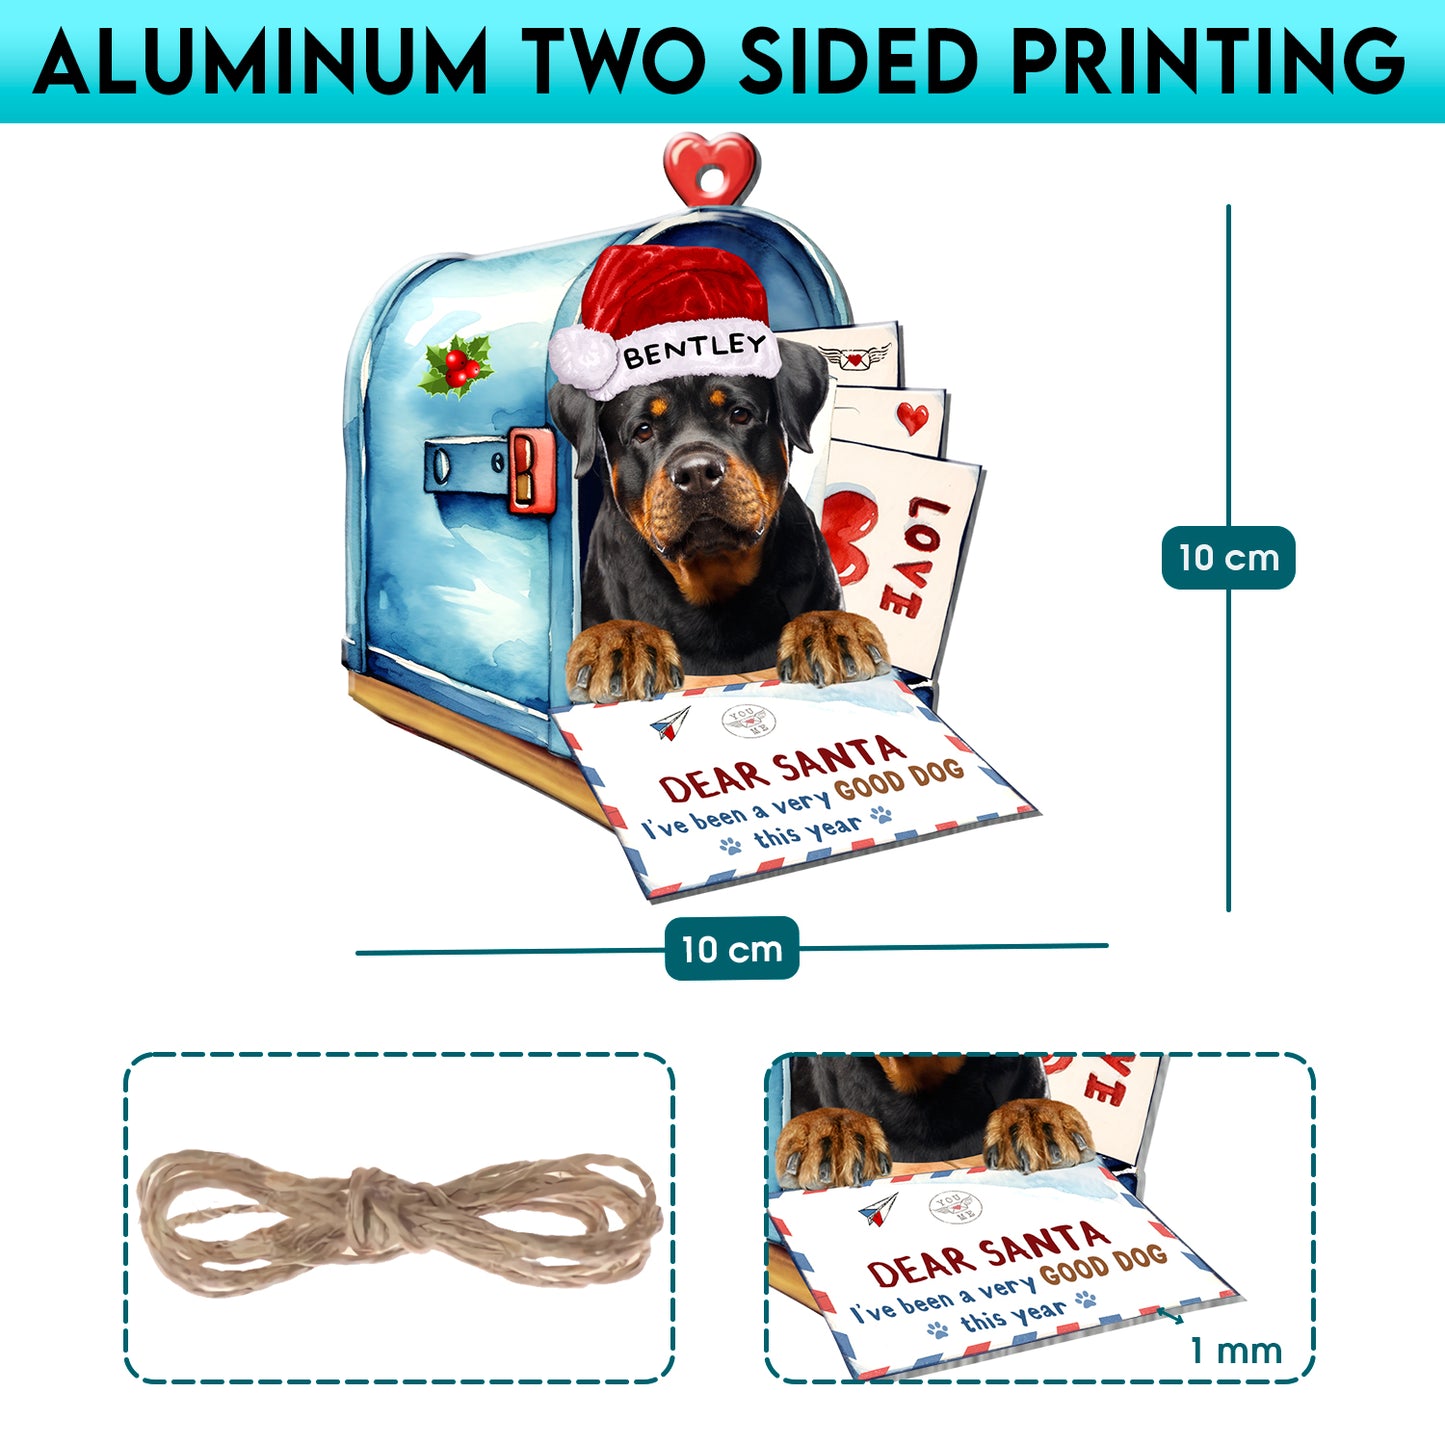 Personalized Rottweiler In Mailbox Christmas Aluminum Ornament